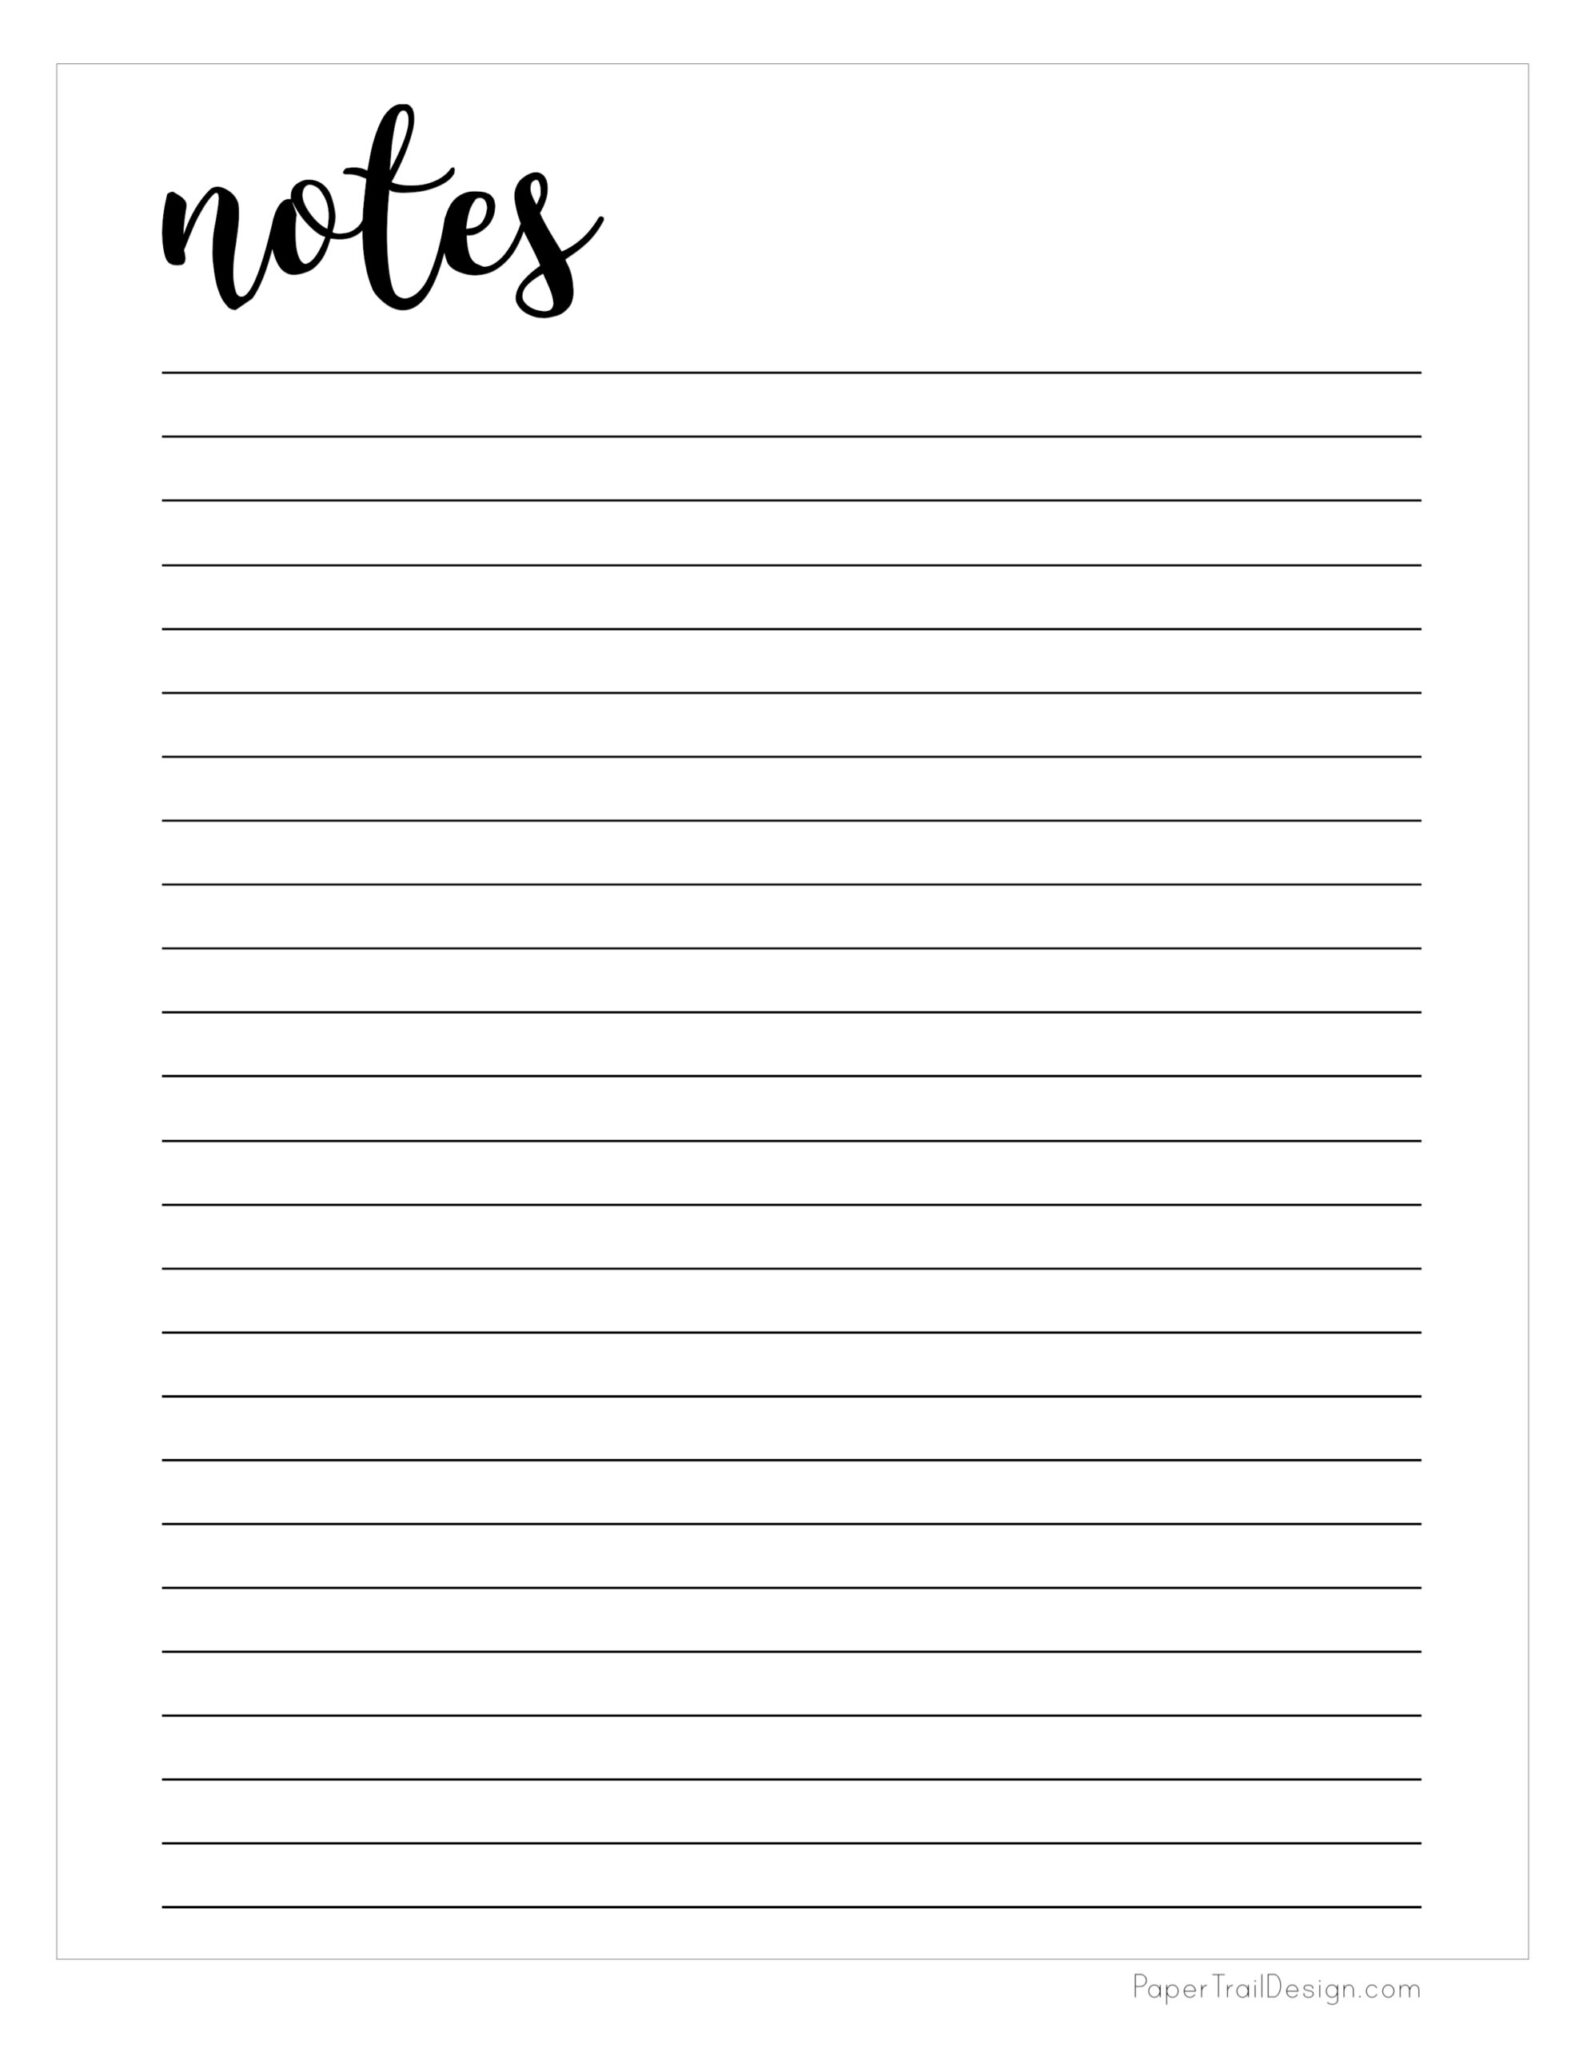 free-printable-notes-template-paper-trail-design-printable-notes-riset